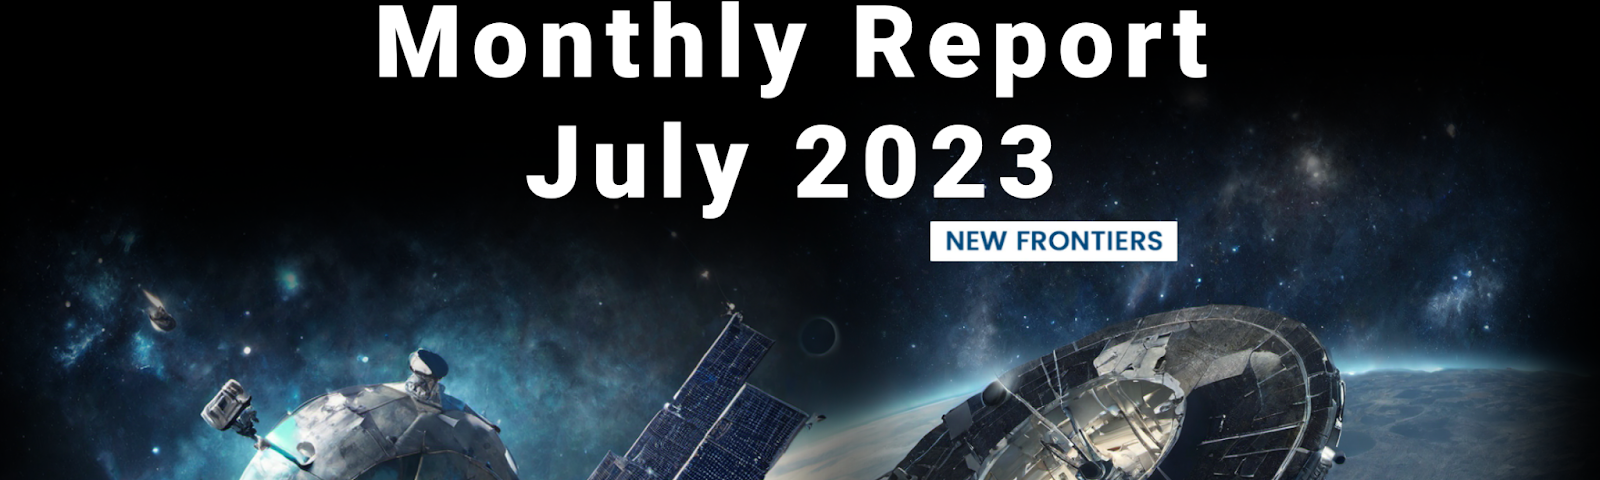 NKN Monthly Report July 2023